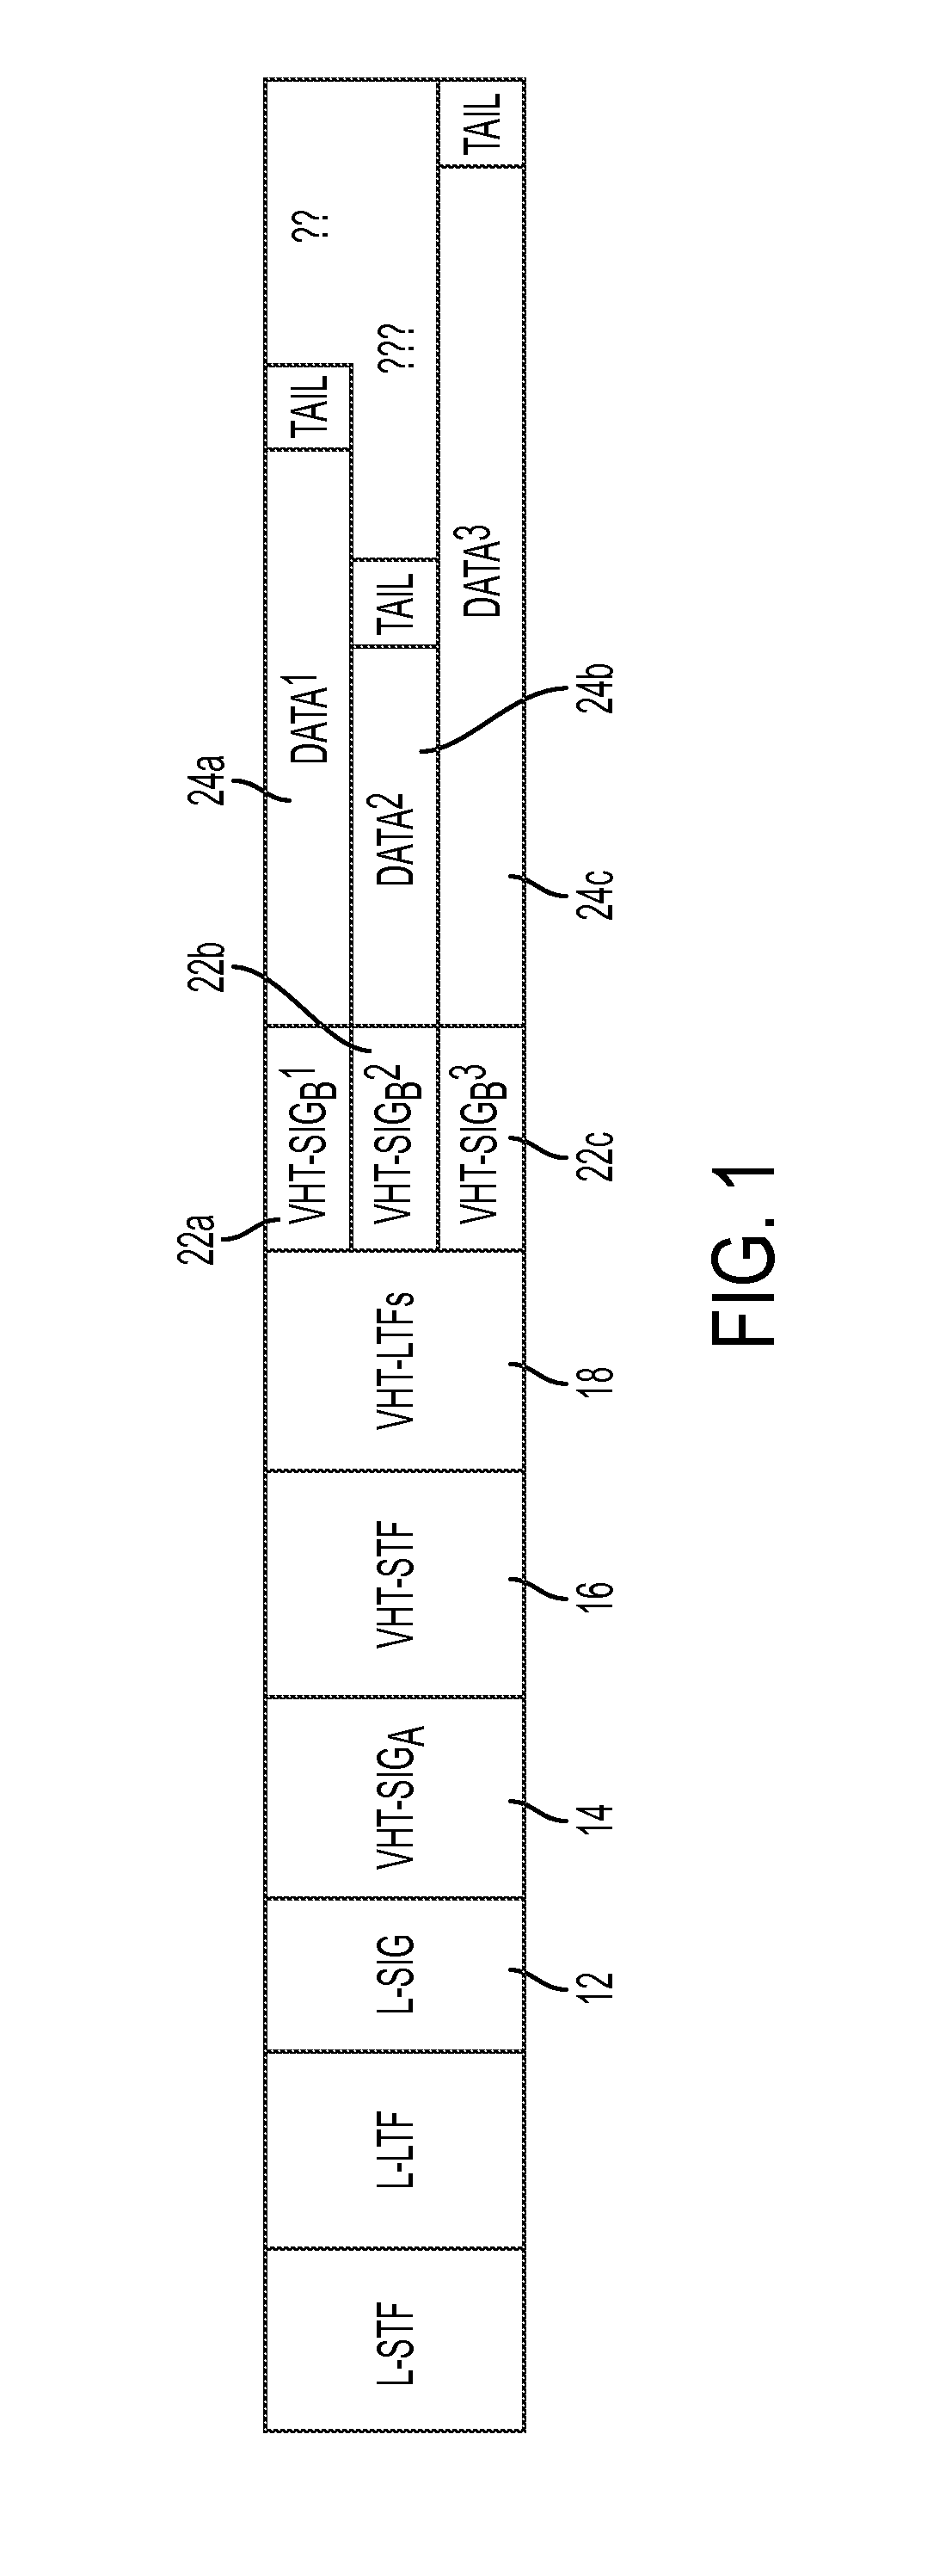 Method and system for improving the efficiency of packet transmission in a multi-user wireless communication system